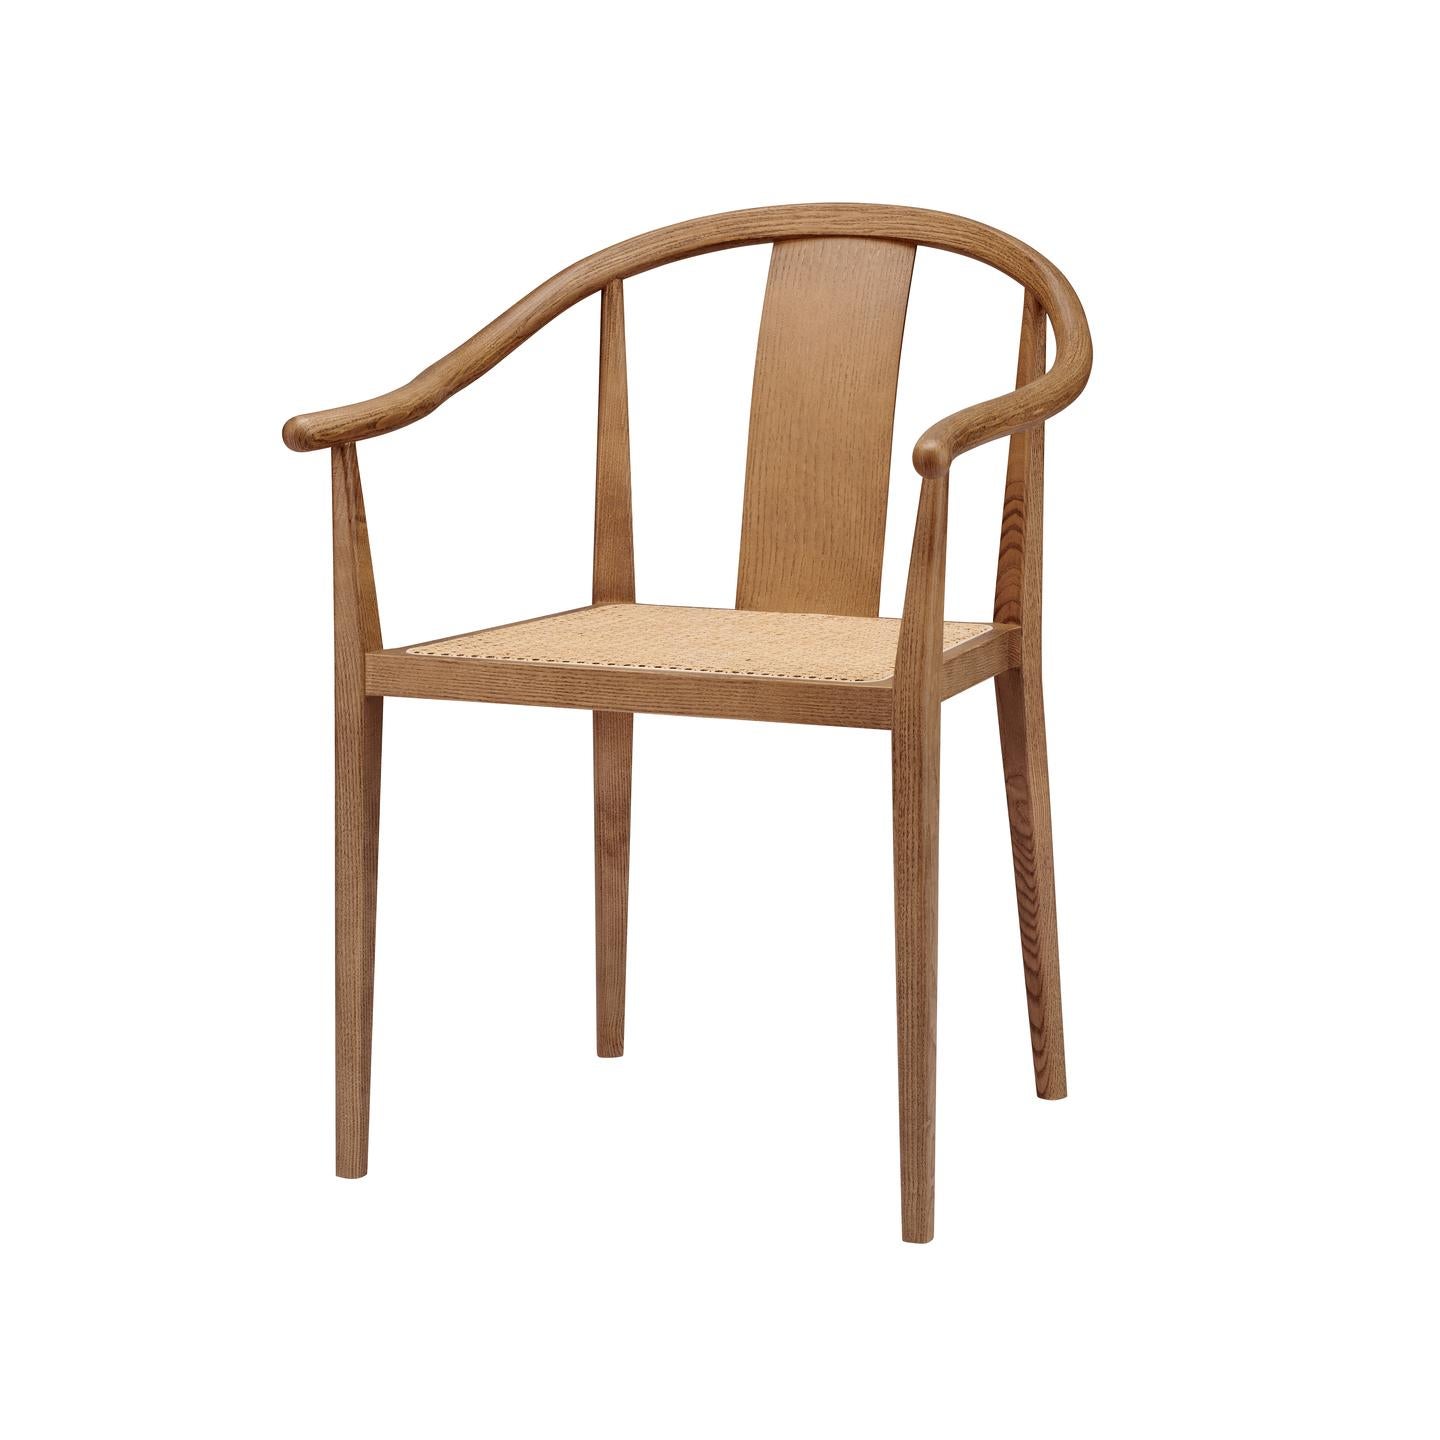 'Shanghai' Chair by Norr11, Light Smoked Oak, Natural Rattan For Sale 6